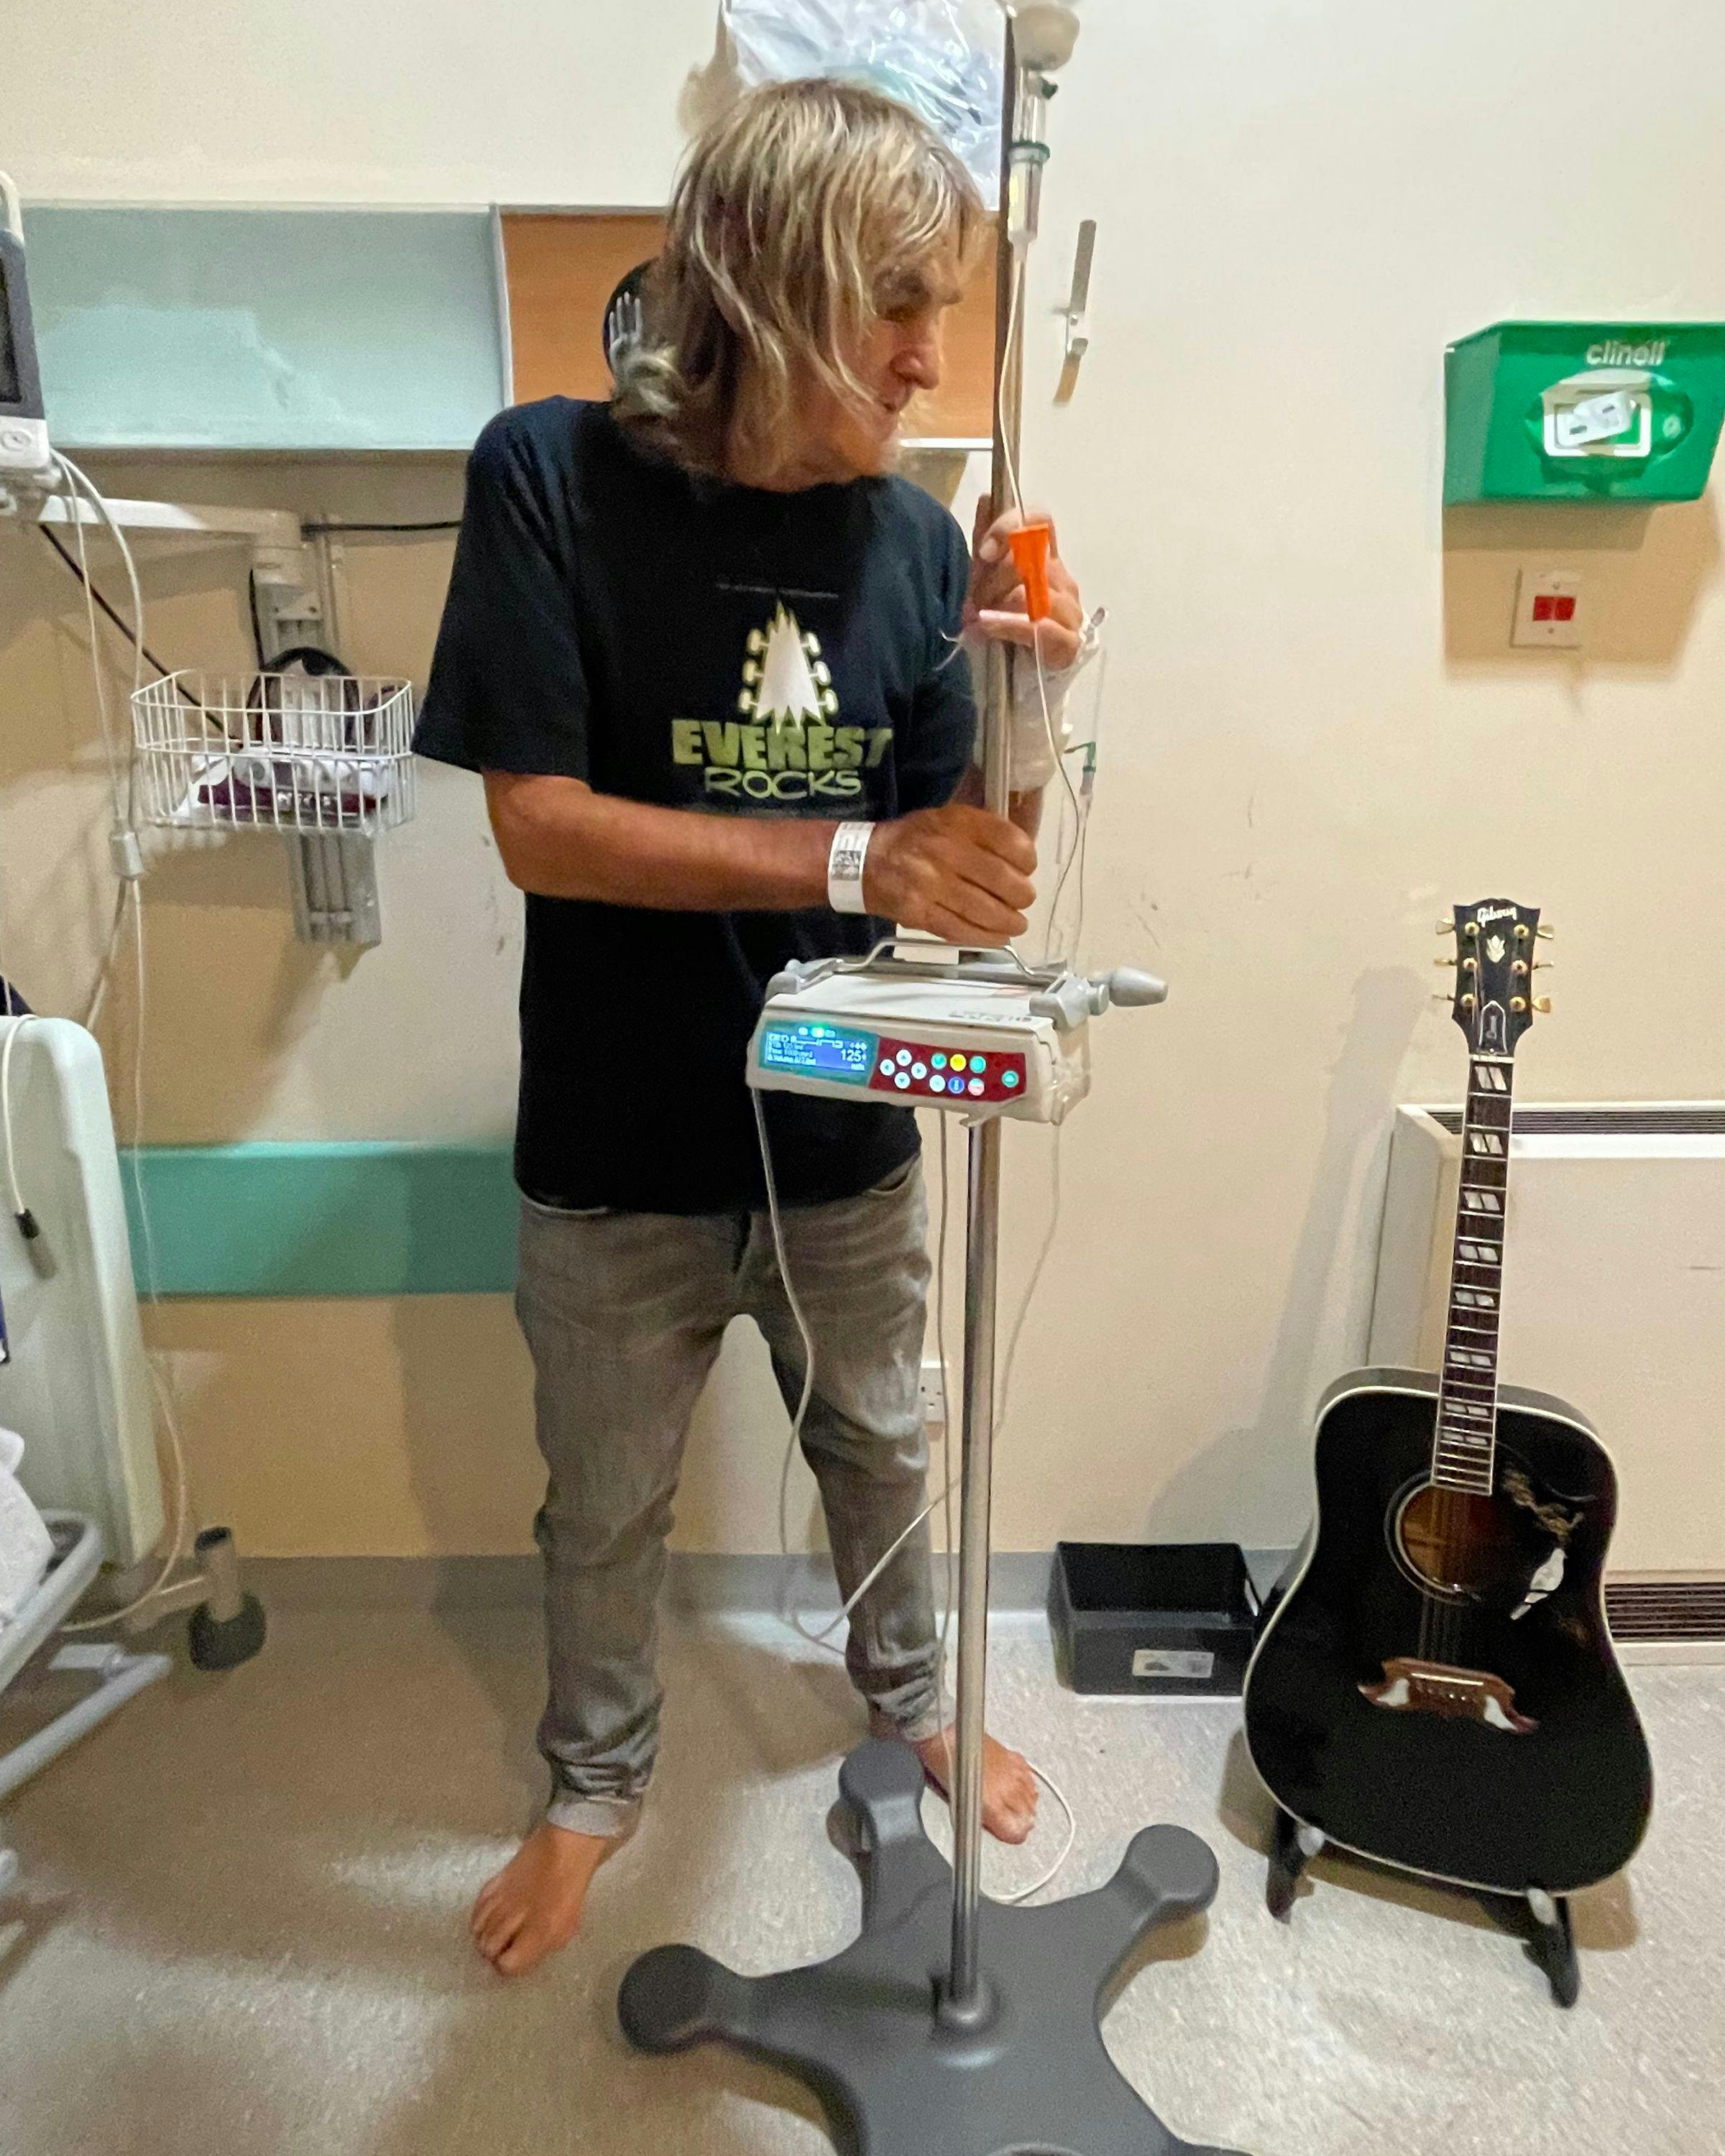 Mike Peters in the hospital holding a black guitar and chemo pole